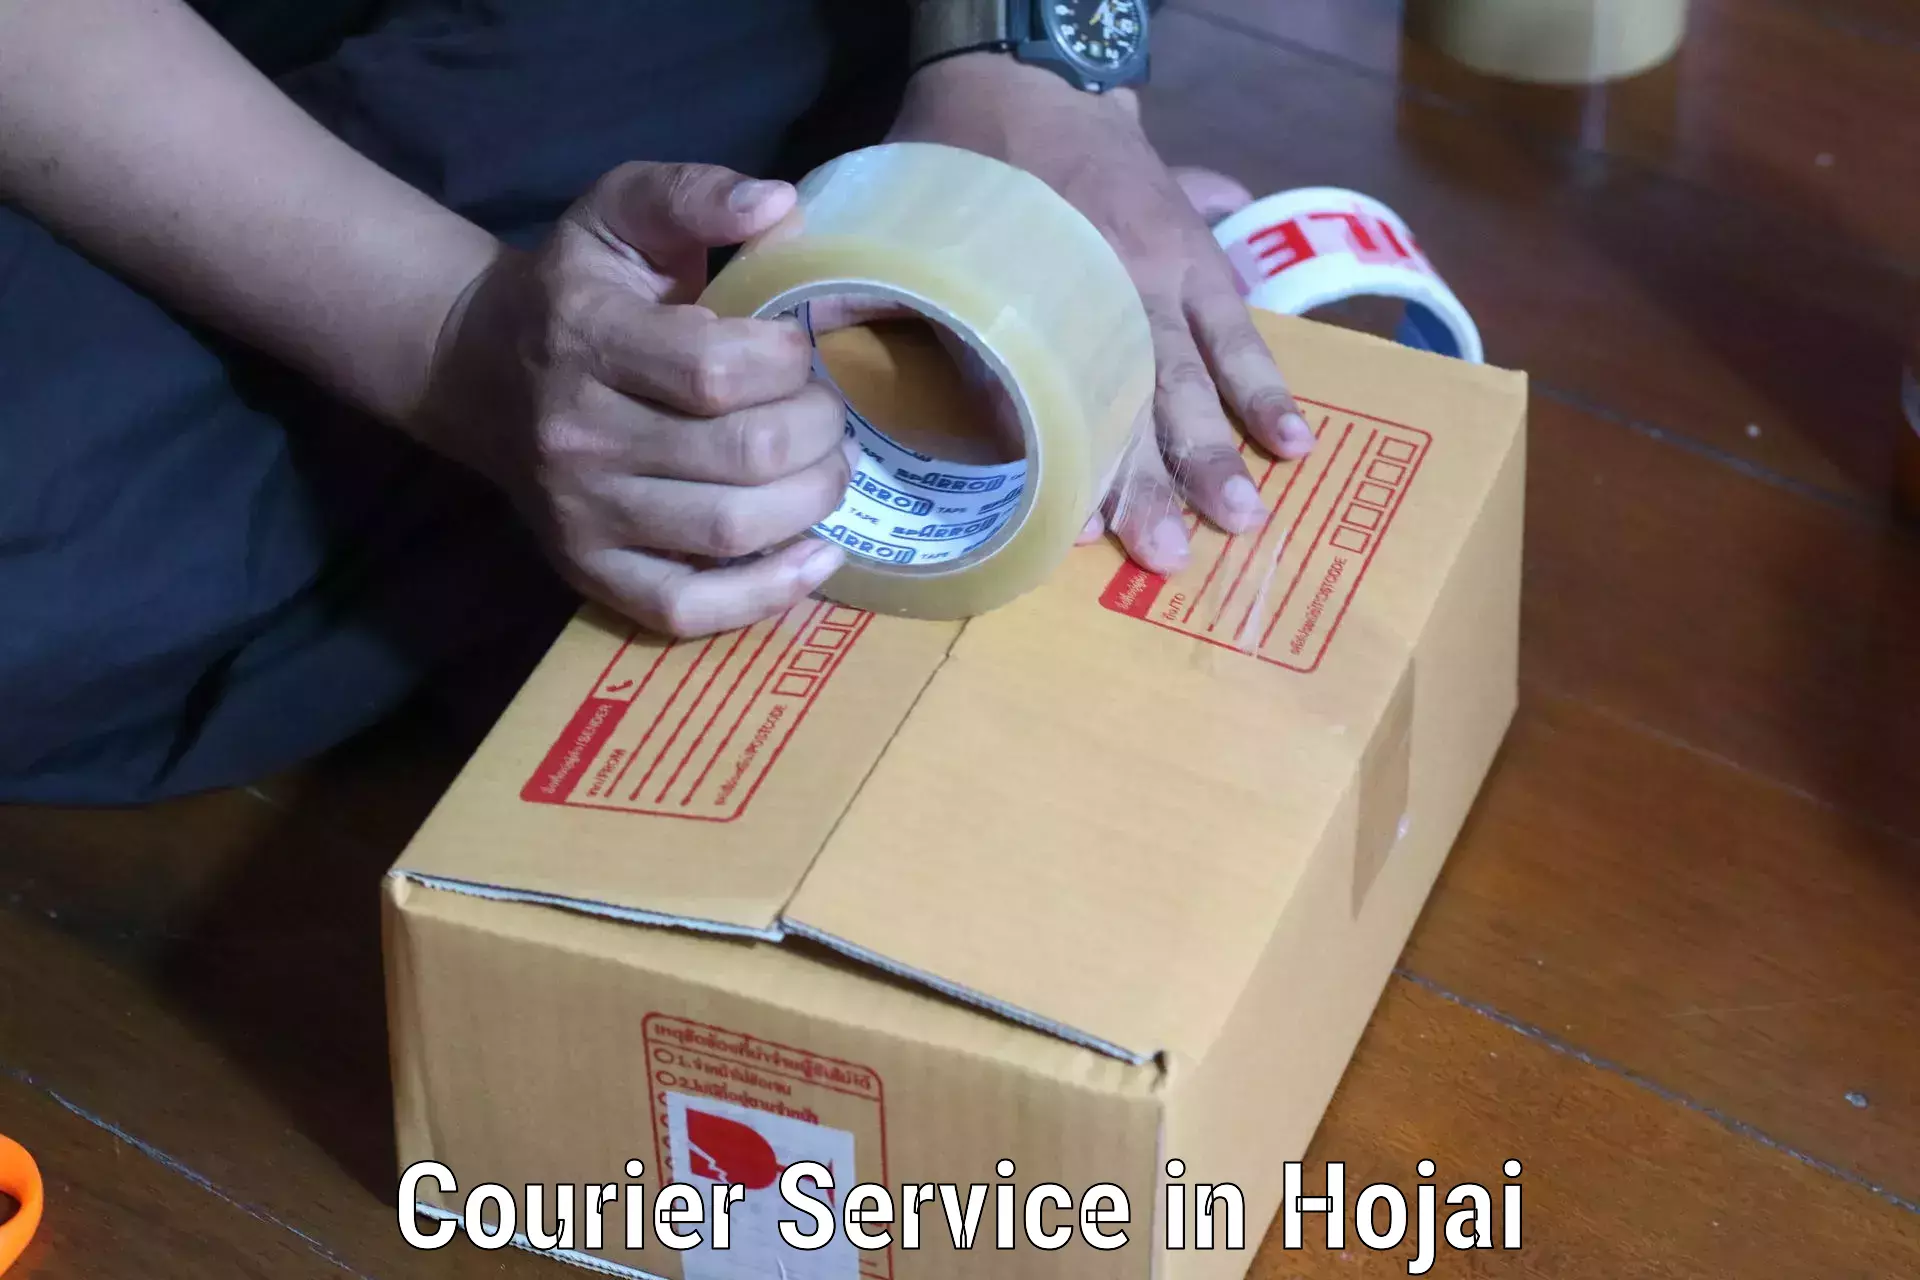 Expedited shipping methods in Hojai